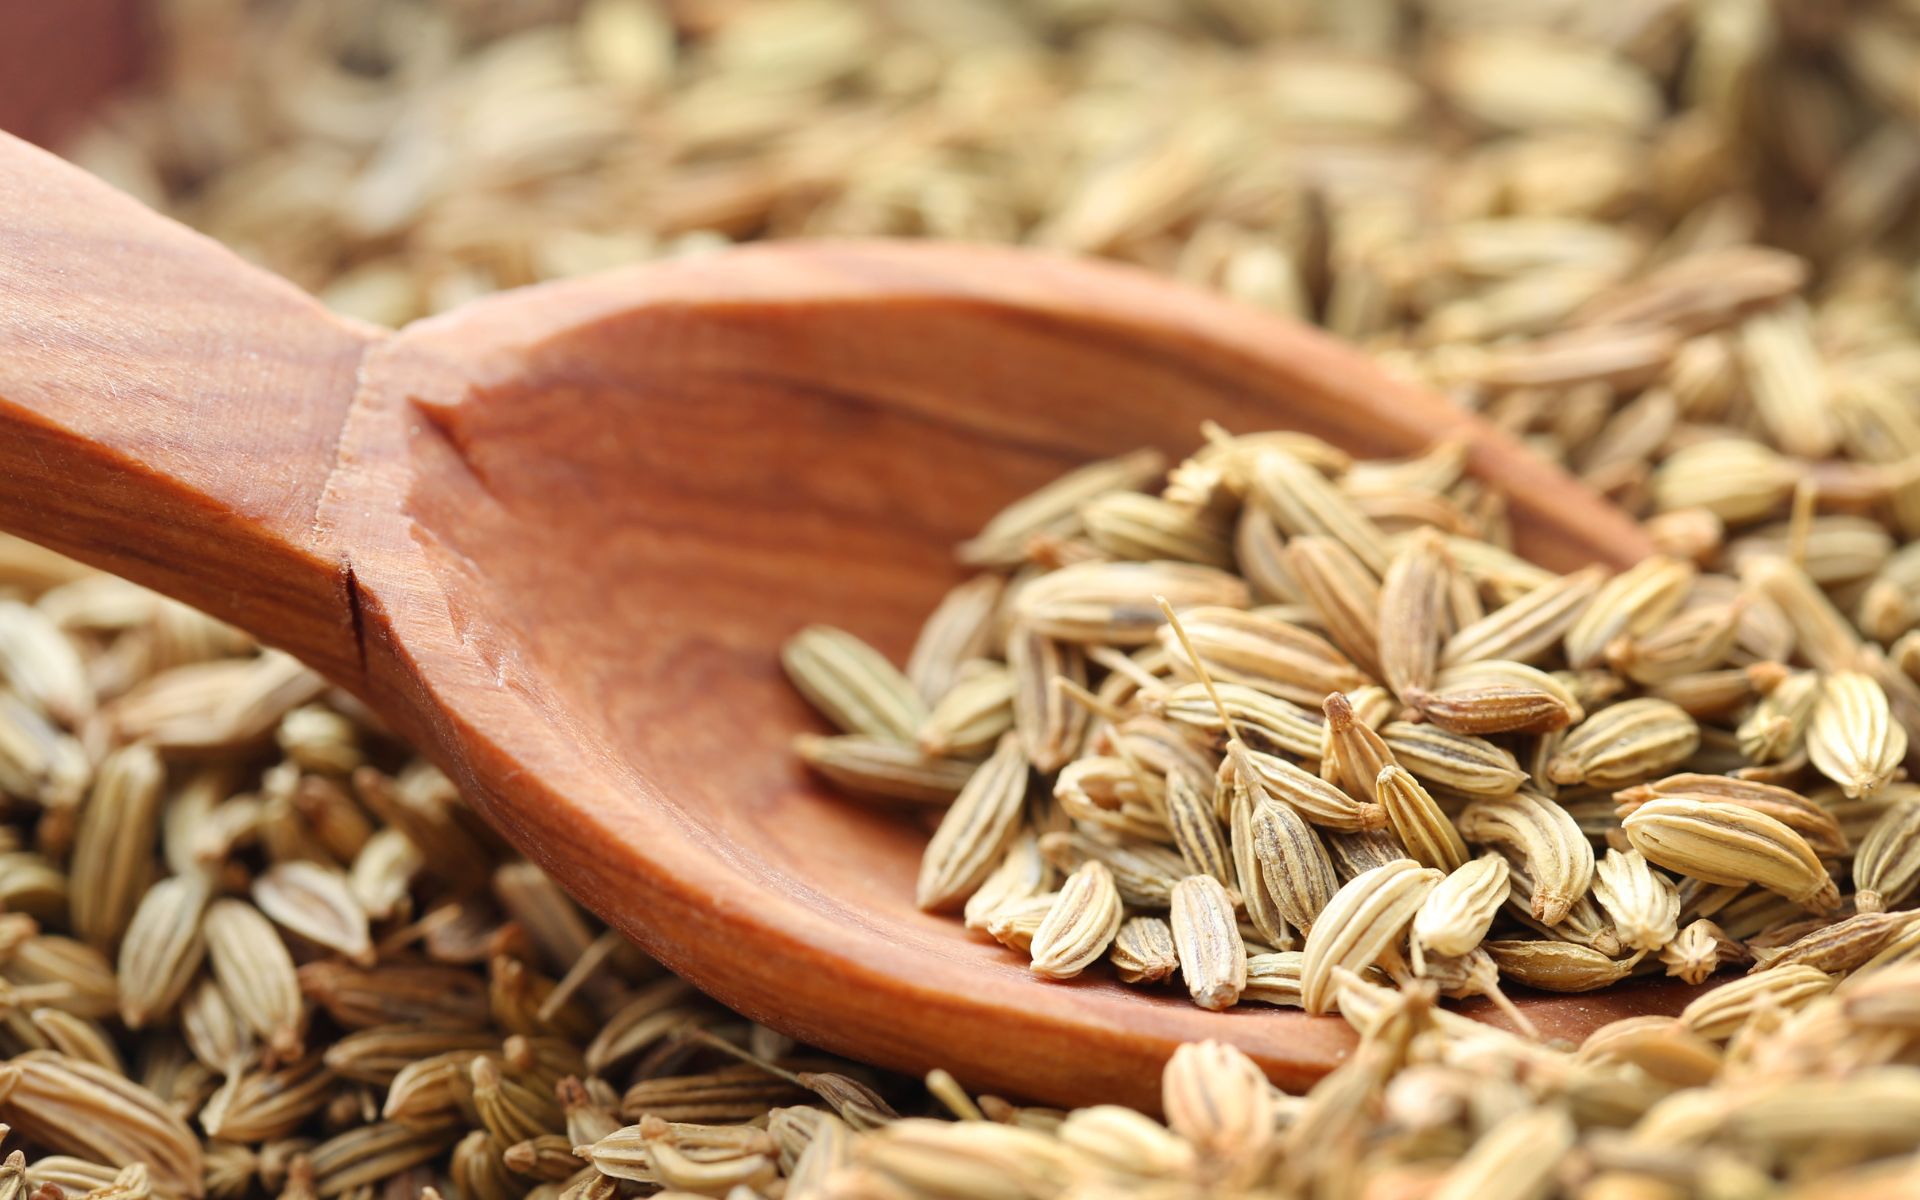 Use a Fennel Seed Extract